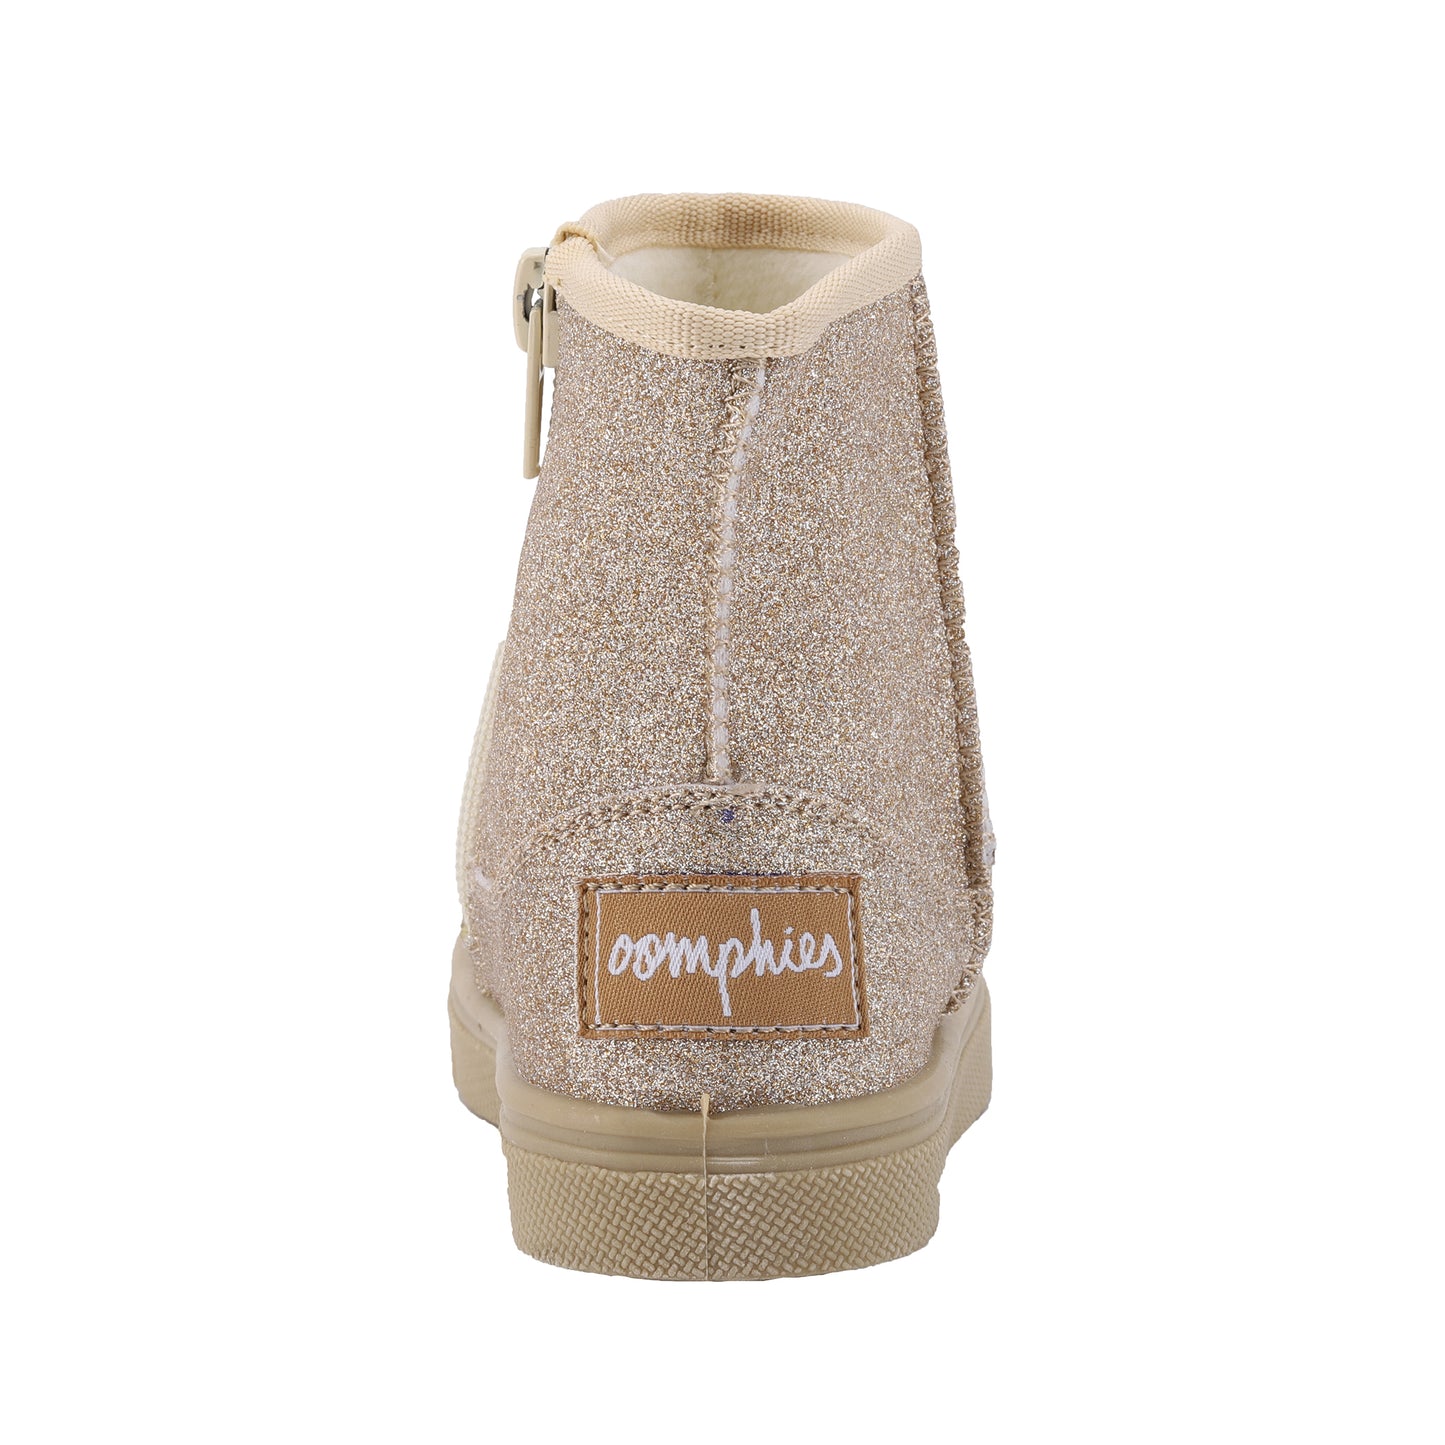 Oomphies Frost Boots - Gold Glitter